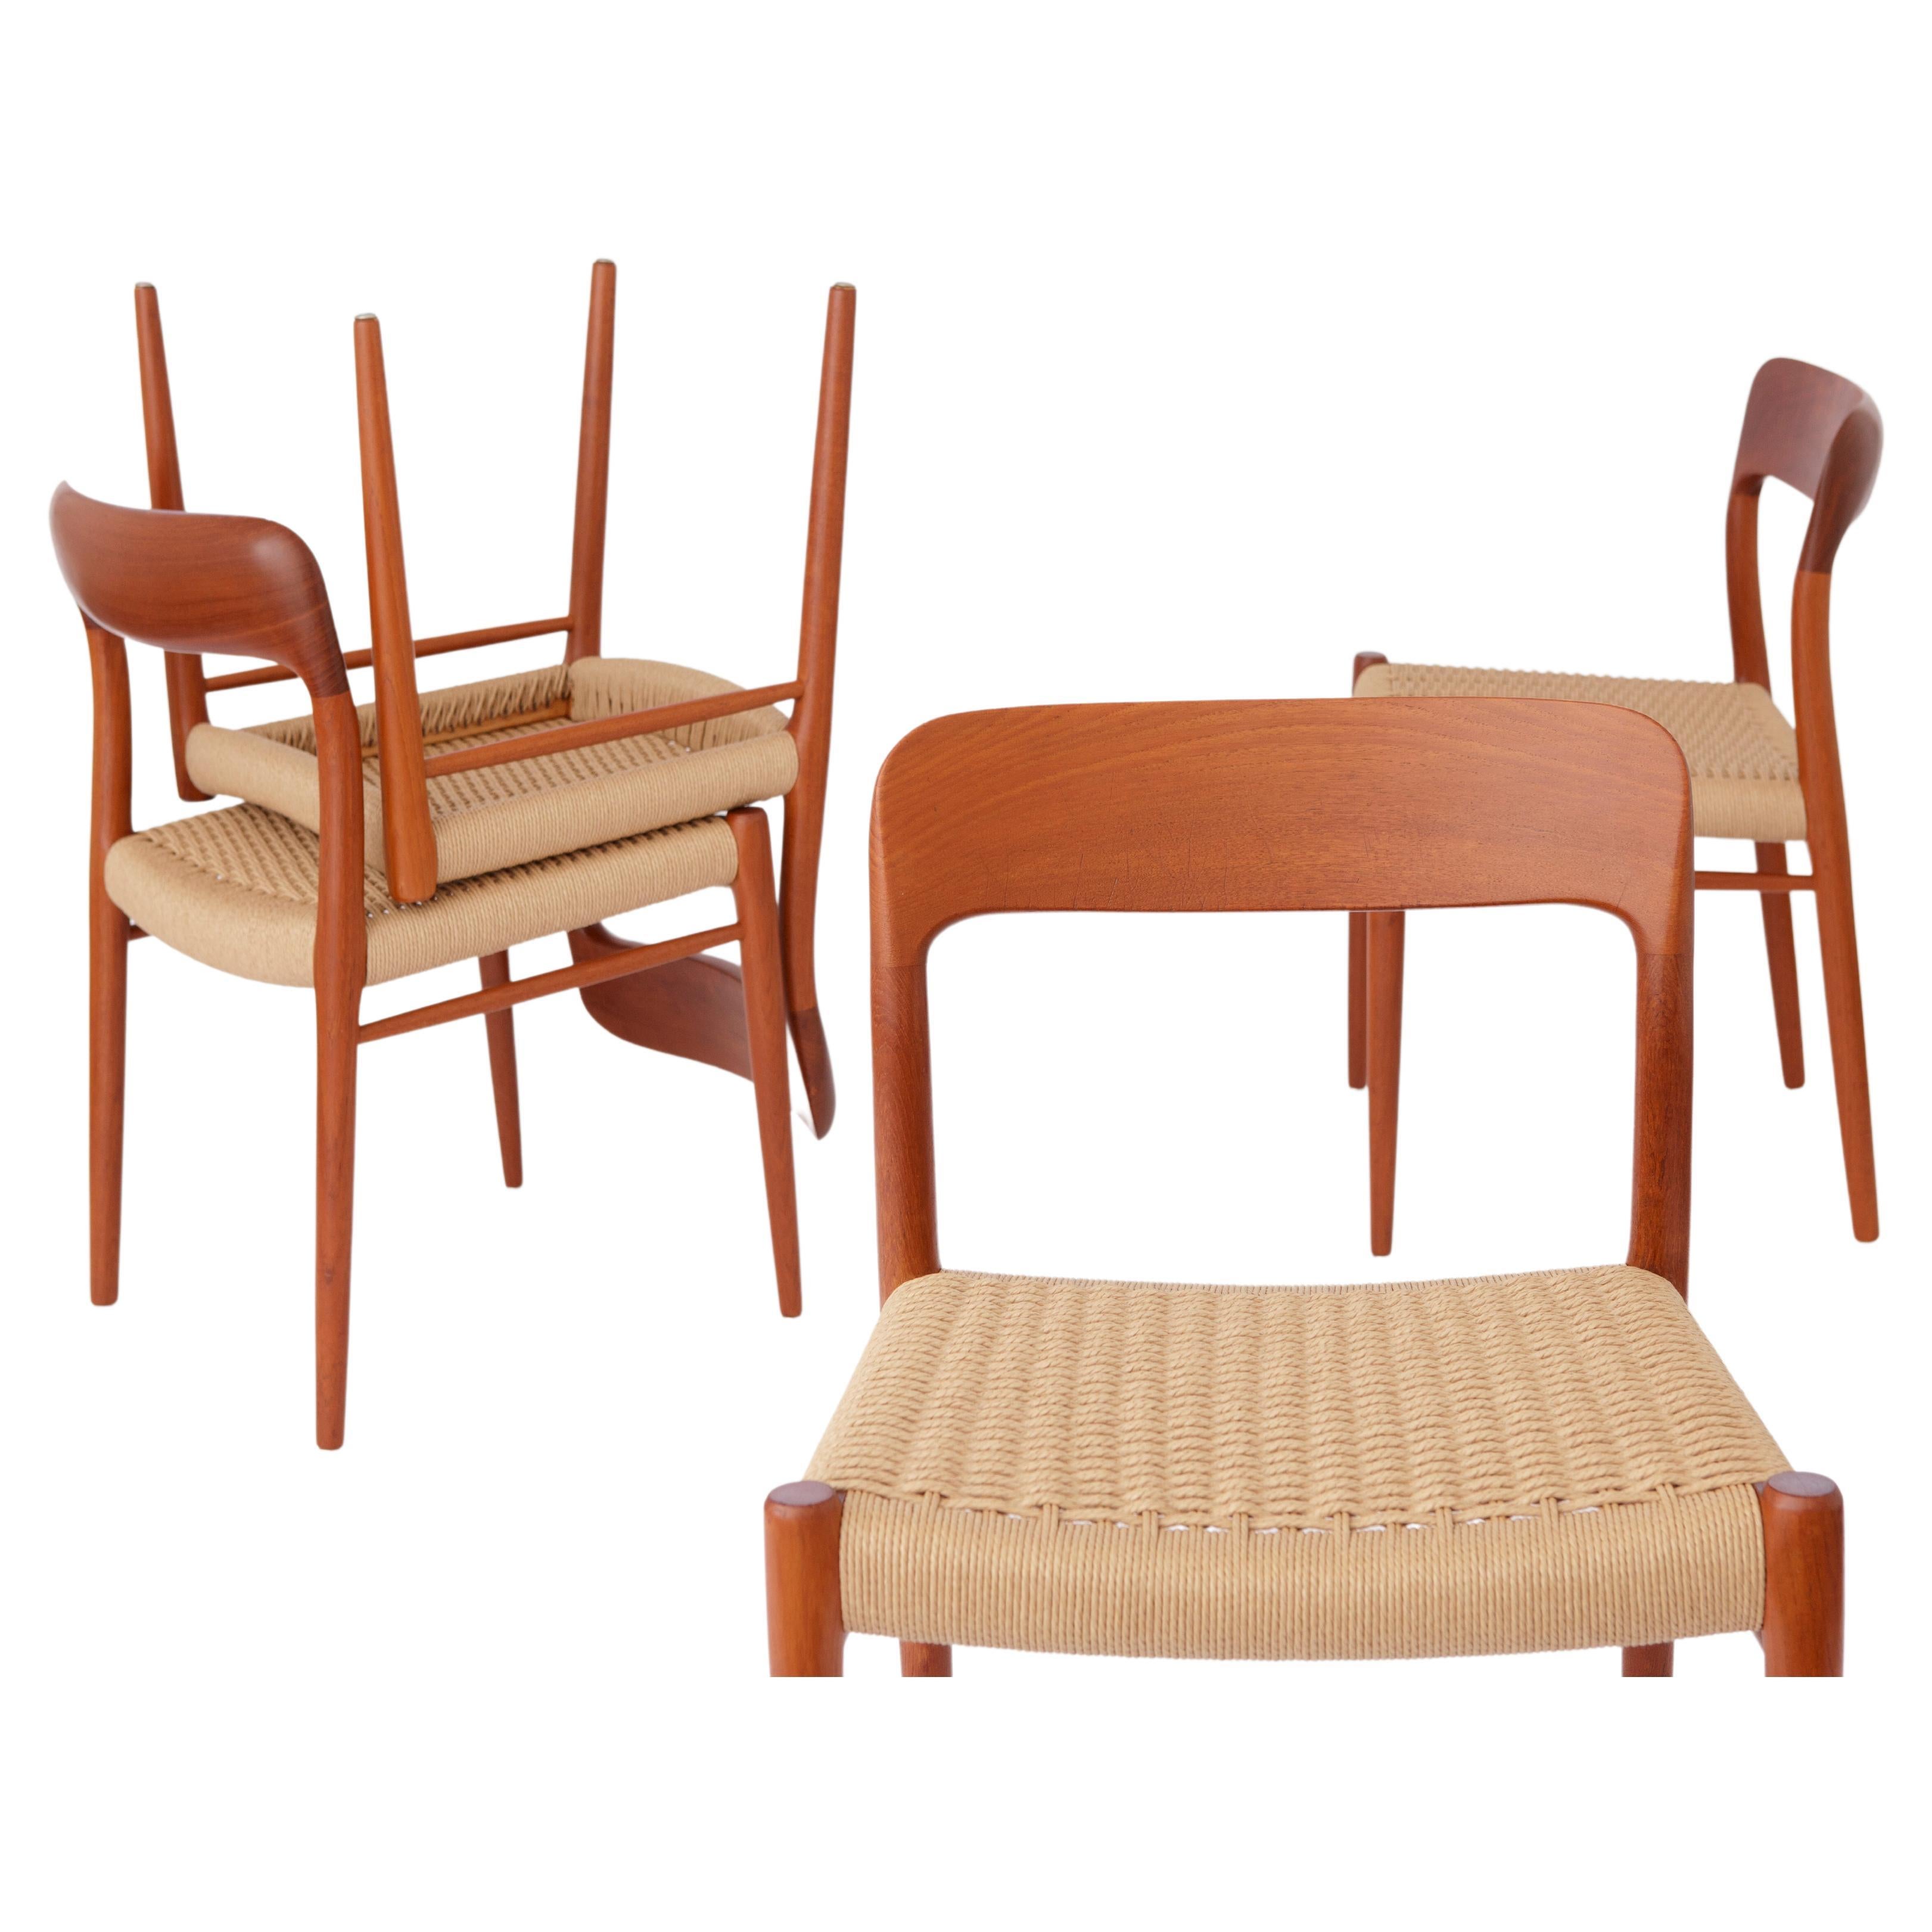 4 Niels Moller Midcentury Teak Dining Chairs with Papercord Seats, Danish